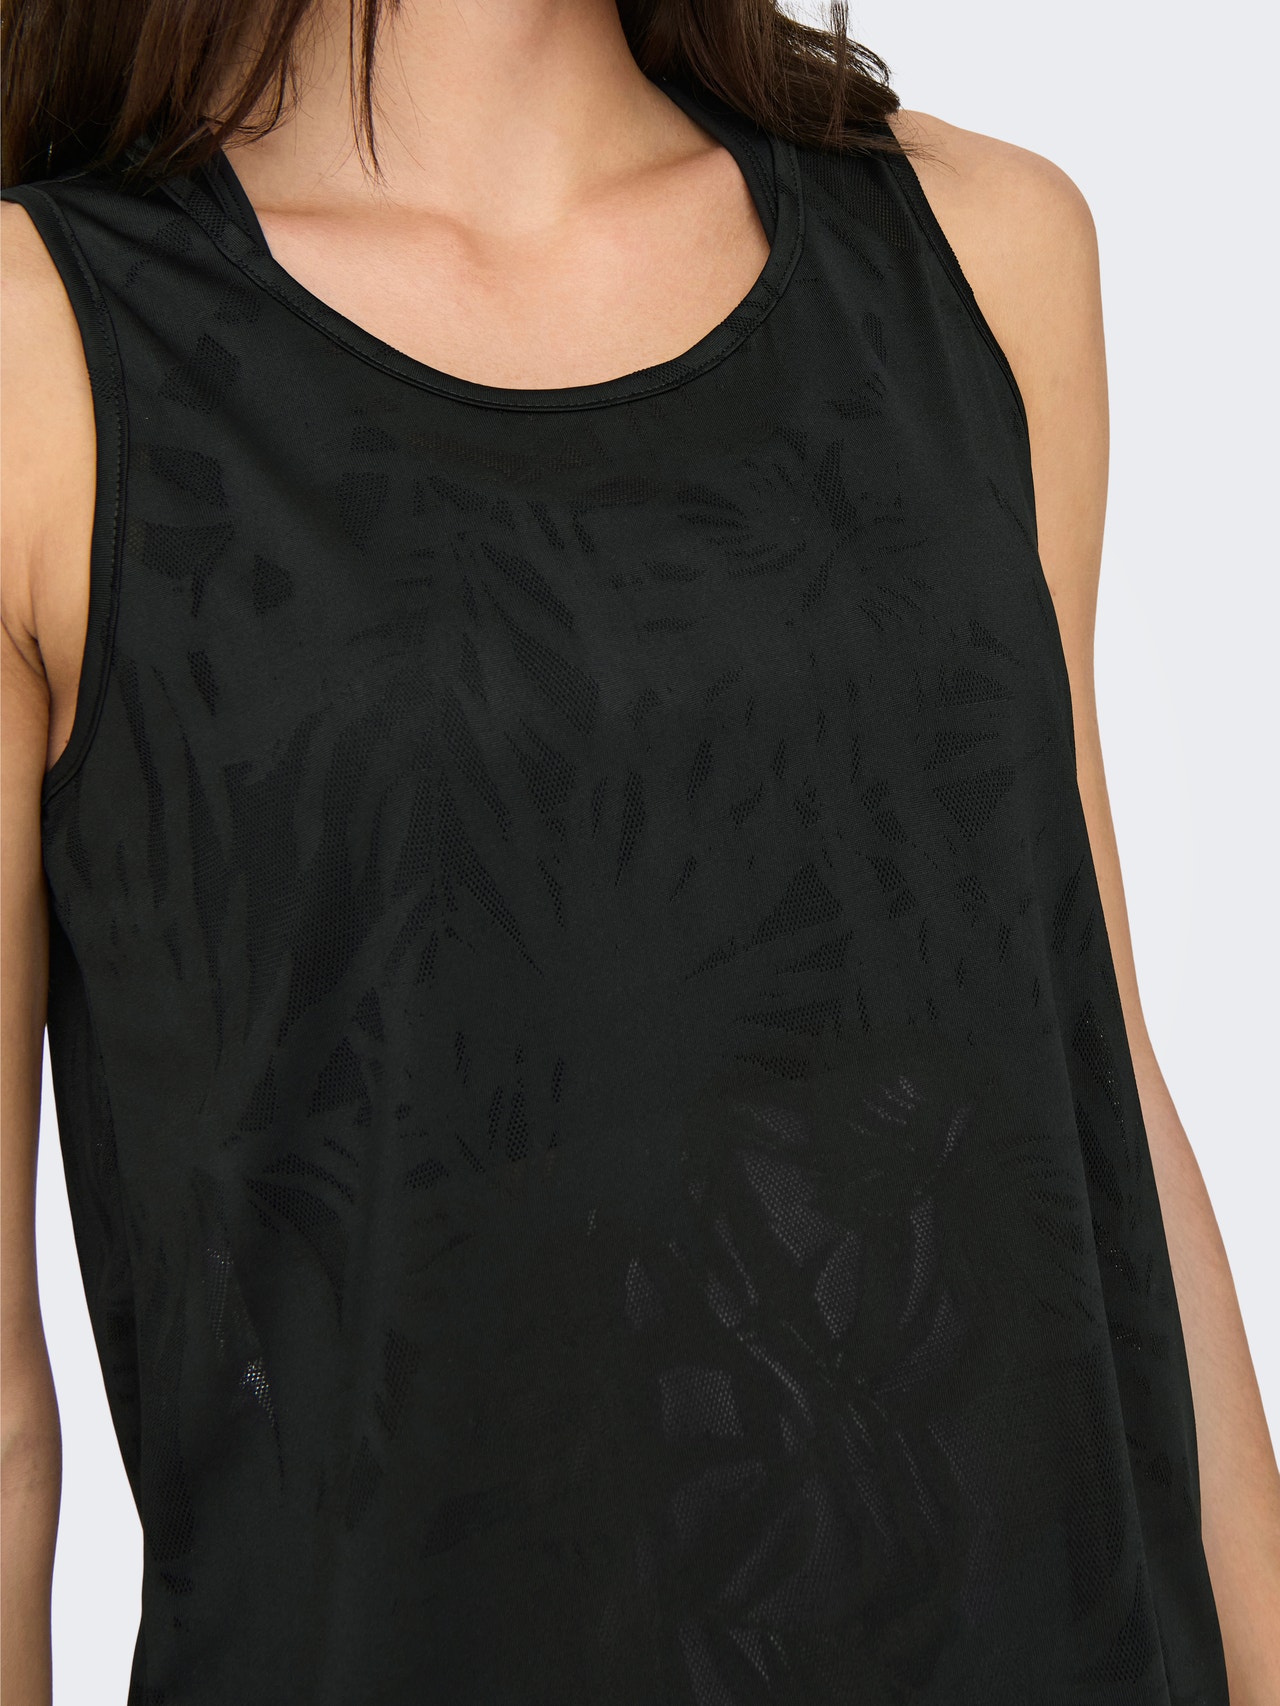 ONLY Training top with pattern -Black - 15318941